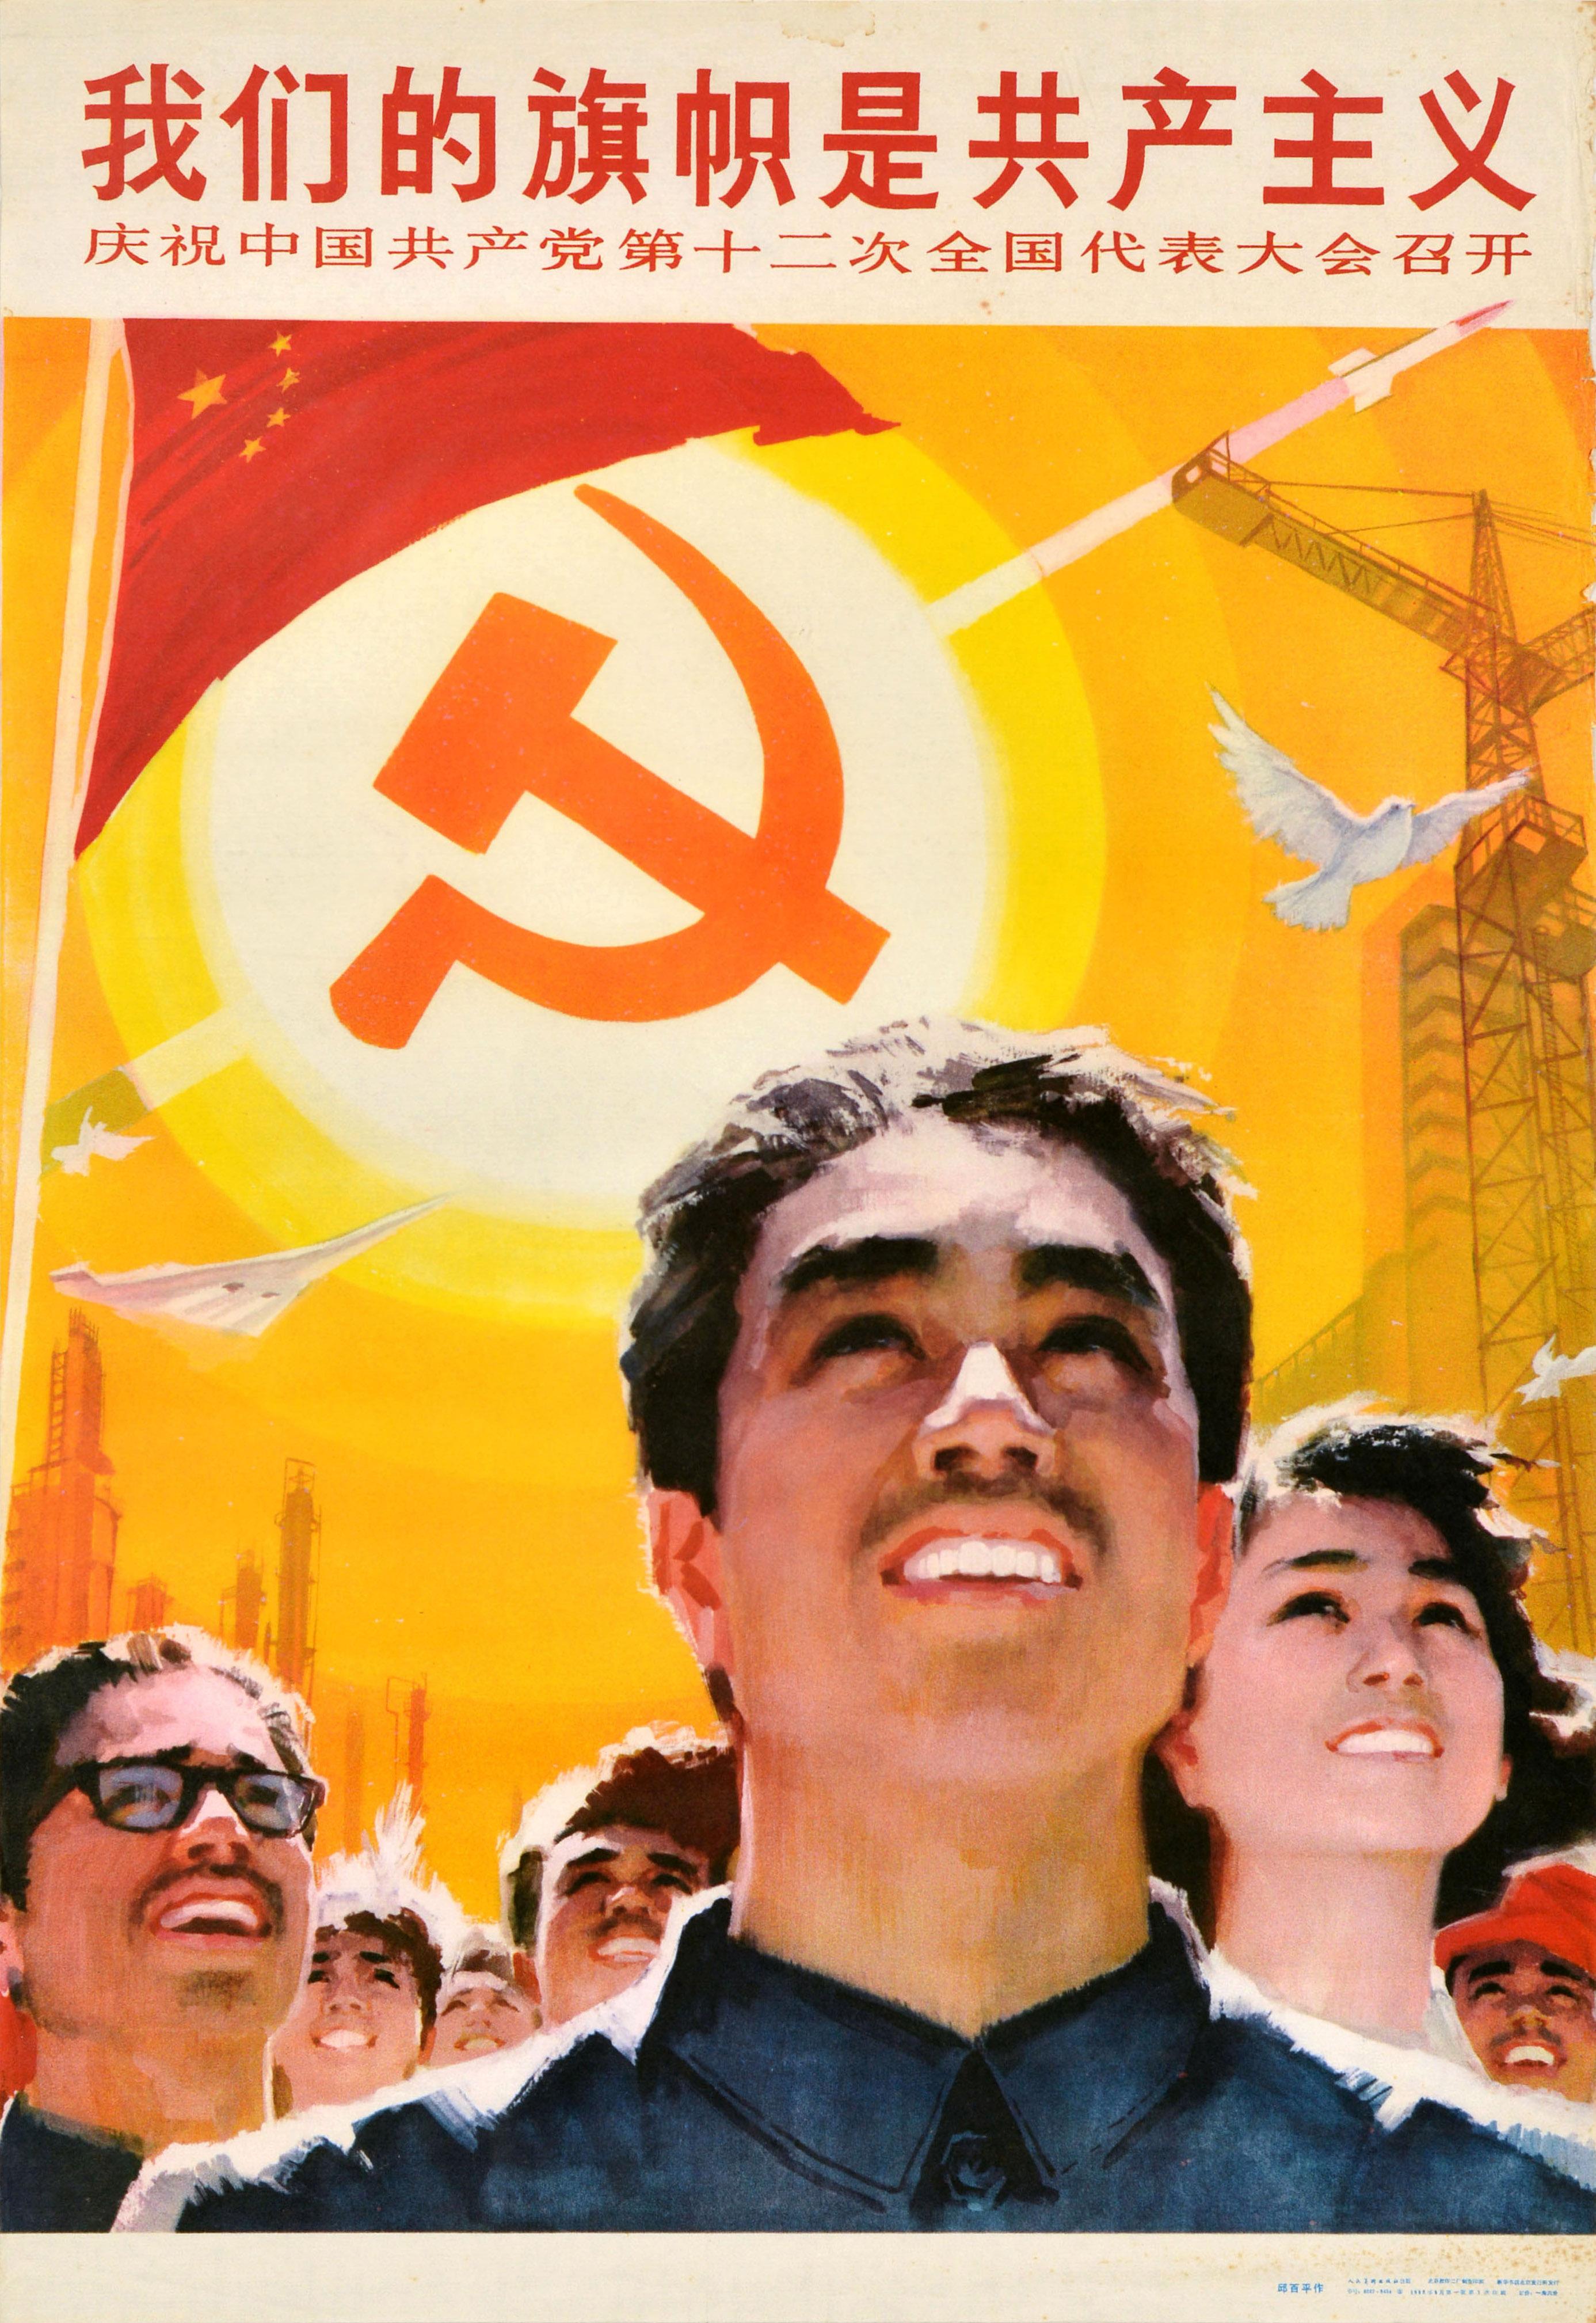 Unknown Print - Original Vintage Chinese Communist Party Propaganda Poster Our Flag Is Communism